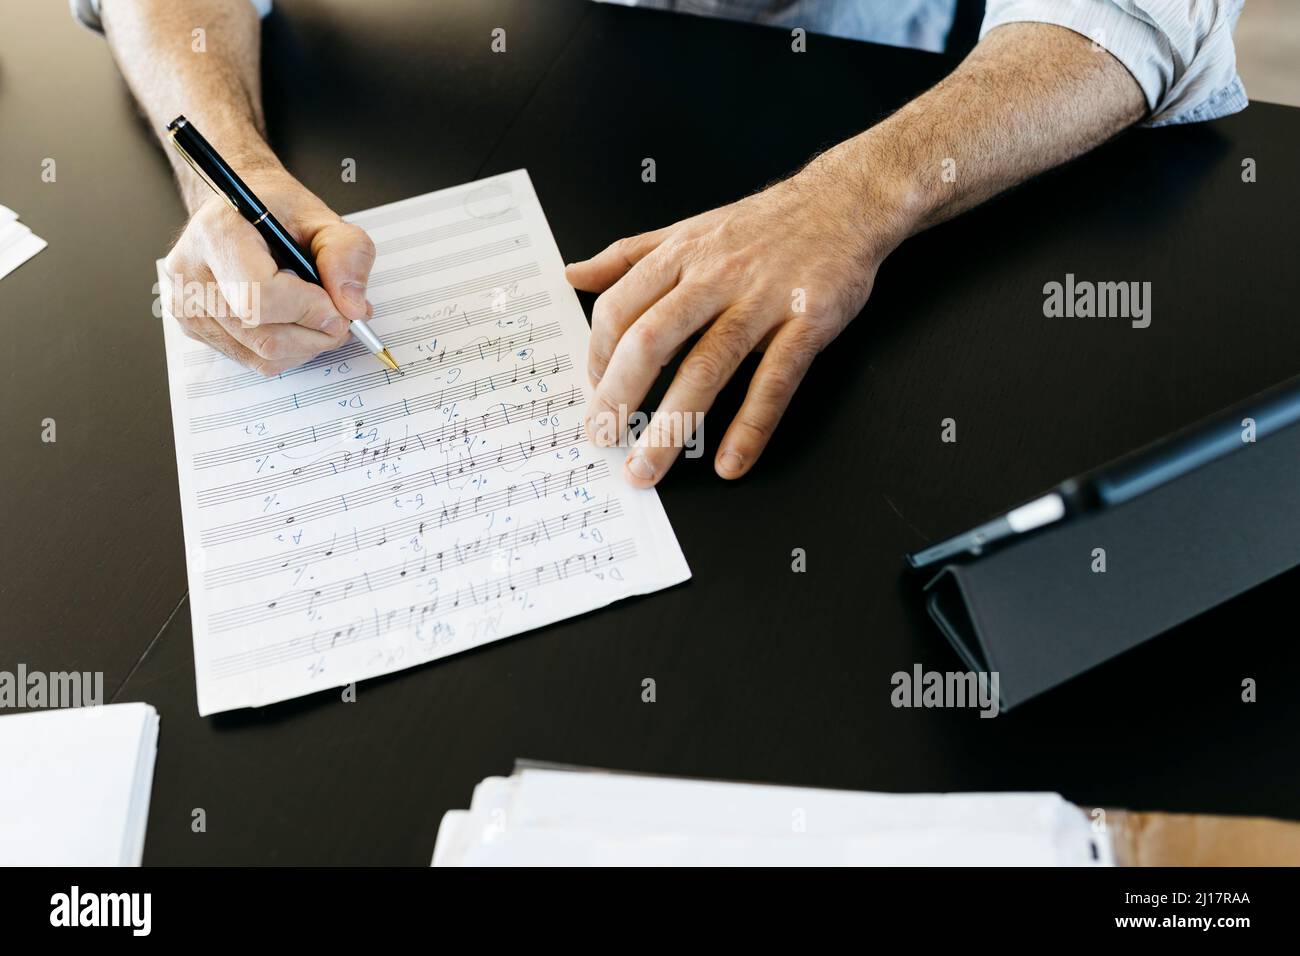 Musician writing musical notes by tablet PC at table Stock Photo